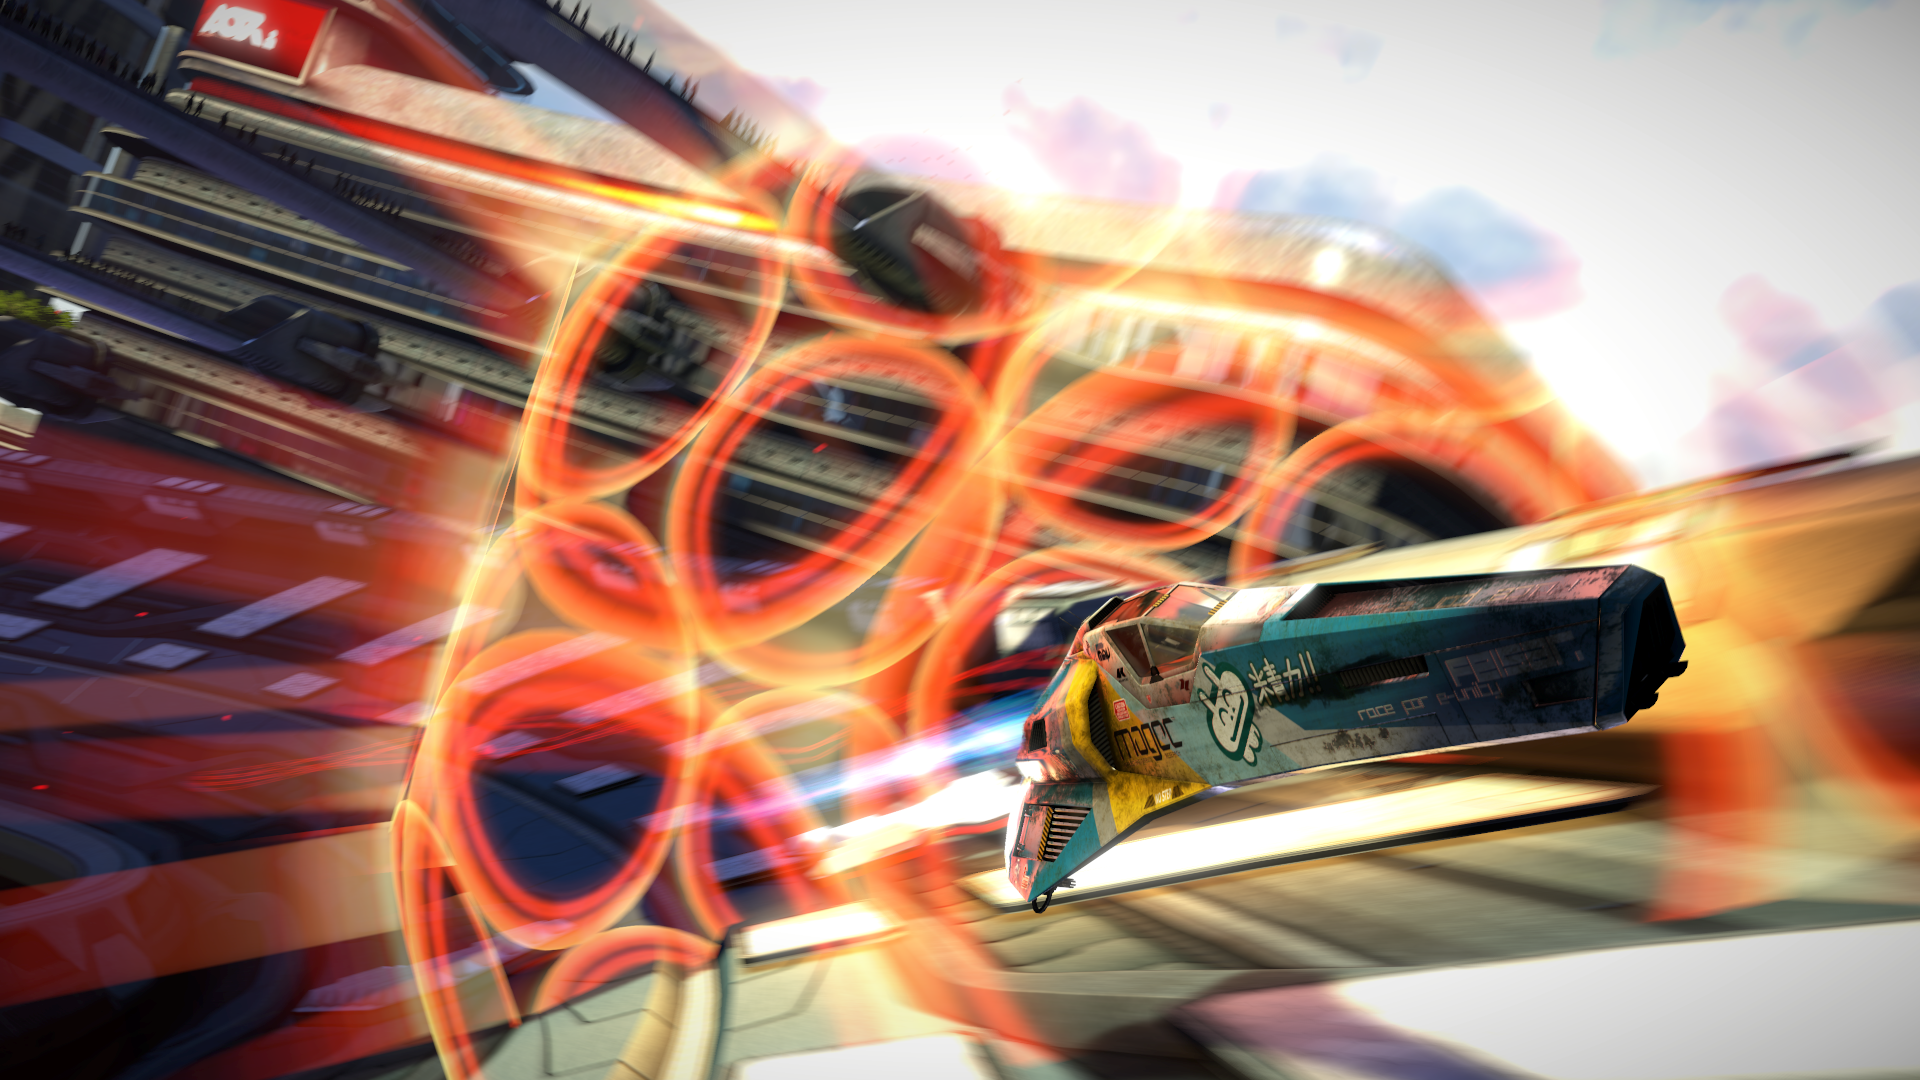 1496817569-wipeout-tm-omega-collection-20170607080115.png